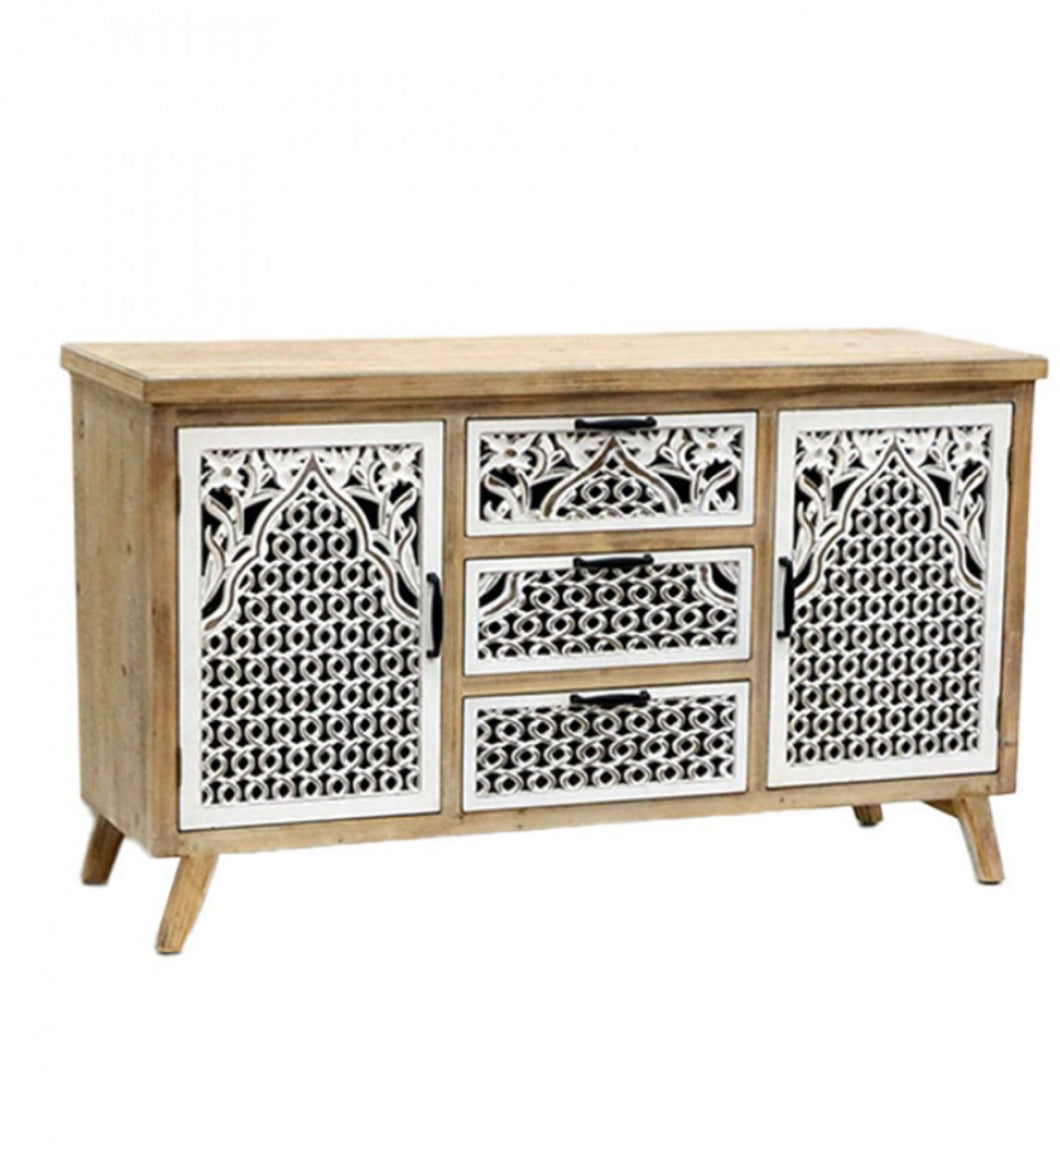 Camila White and Wooden Cabinet 120 cm - CSHWH